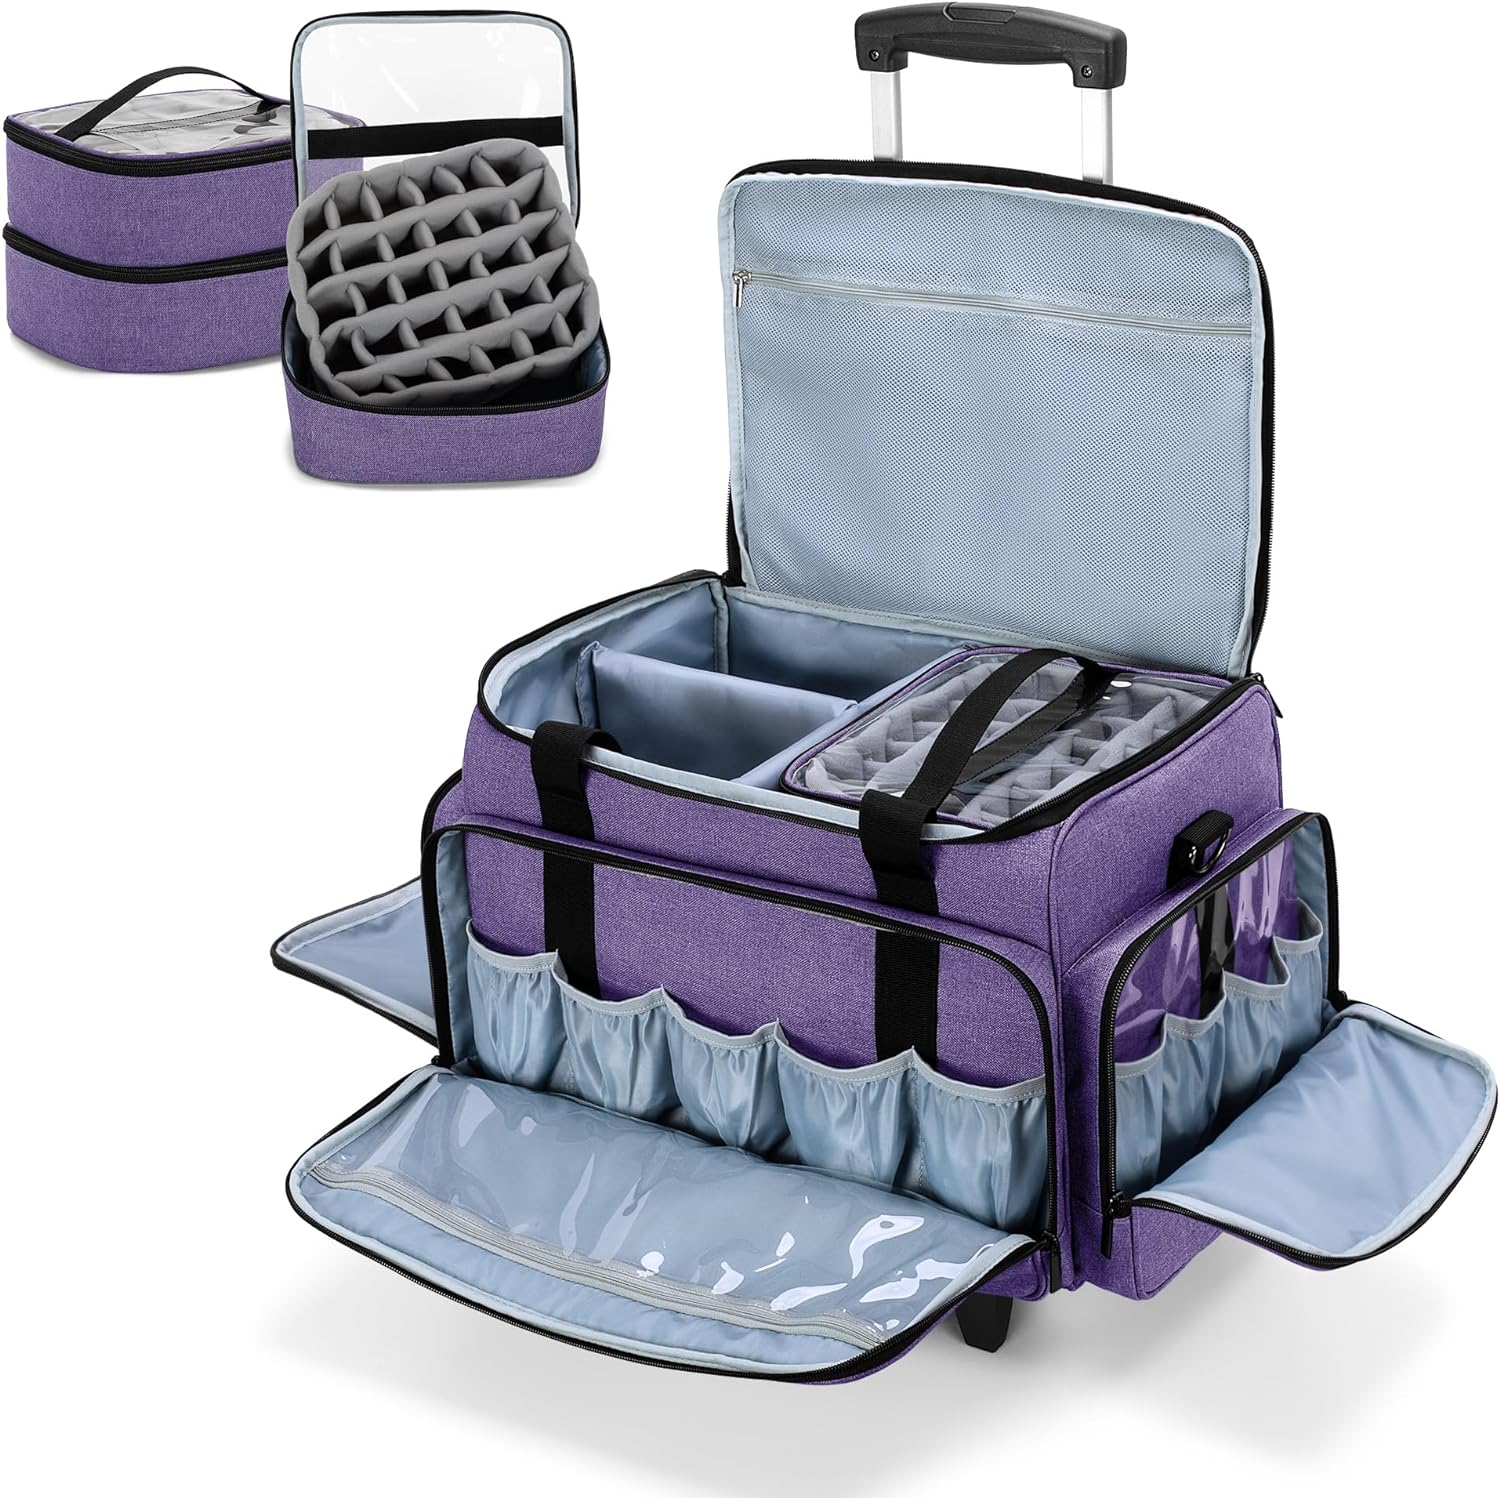 LUXJA Rolling Nail Polish Organizer Holds 90 Bottles and a Nail Lamp, Rolling Nail Polish Case with a Detachable Dolly and 3 Removable Cases (Patented), Purple